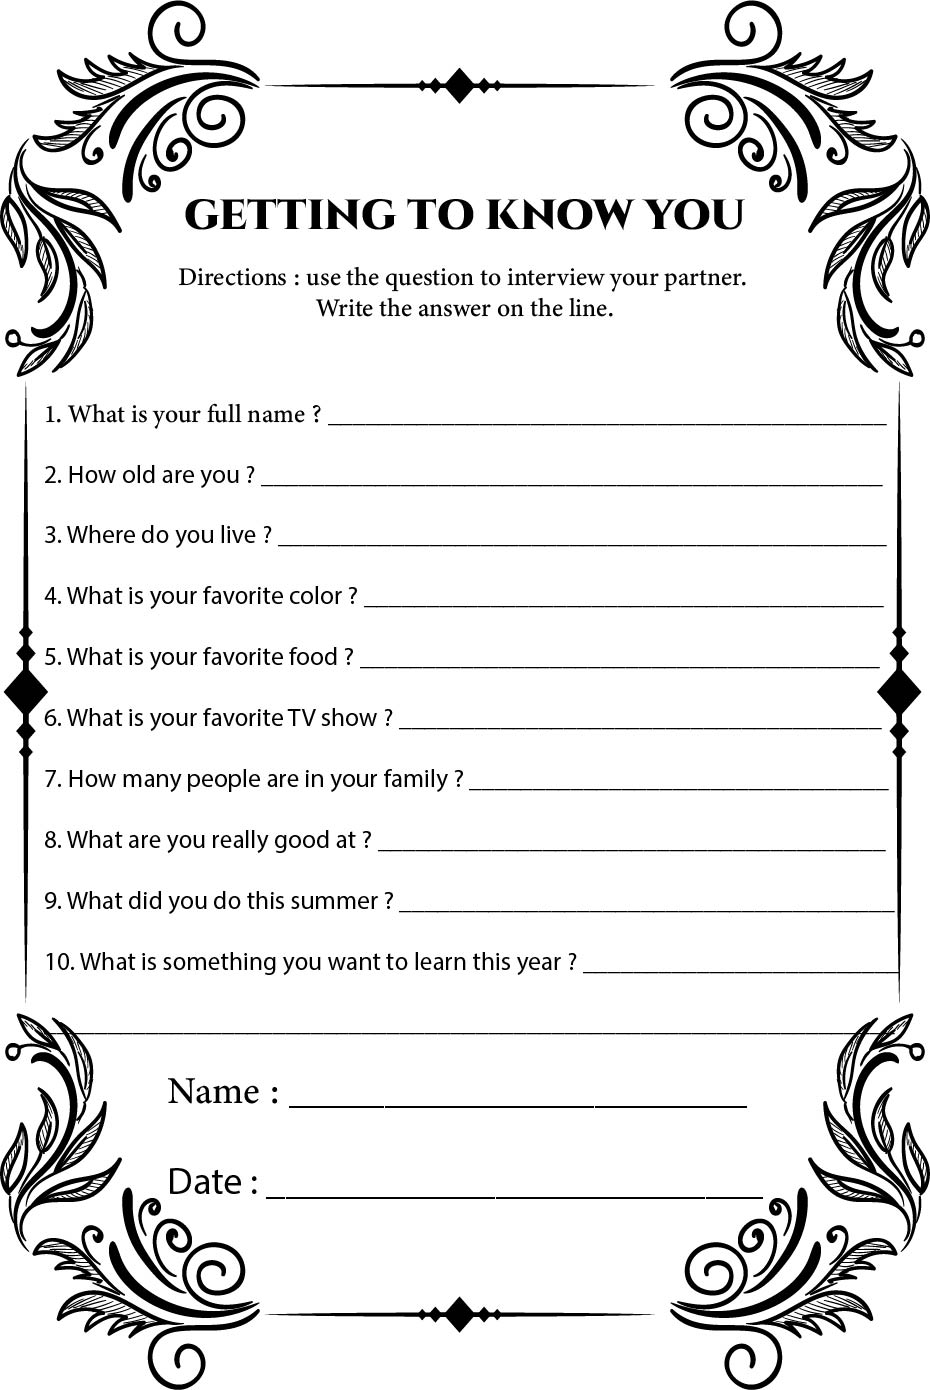 10-best-classroom-getting-to-know-you-printables-printablee